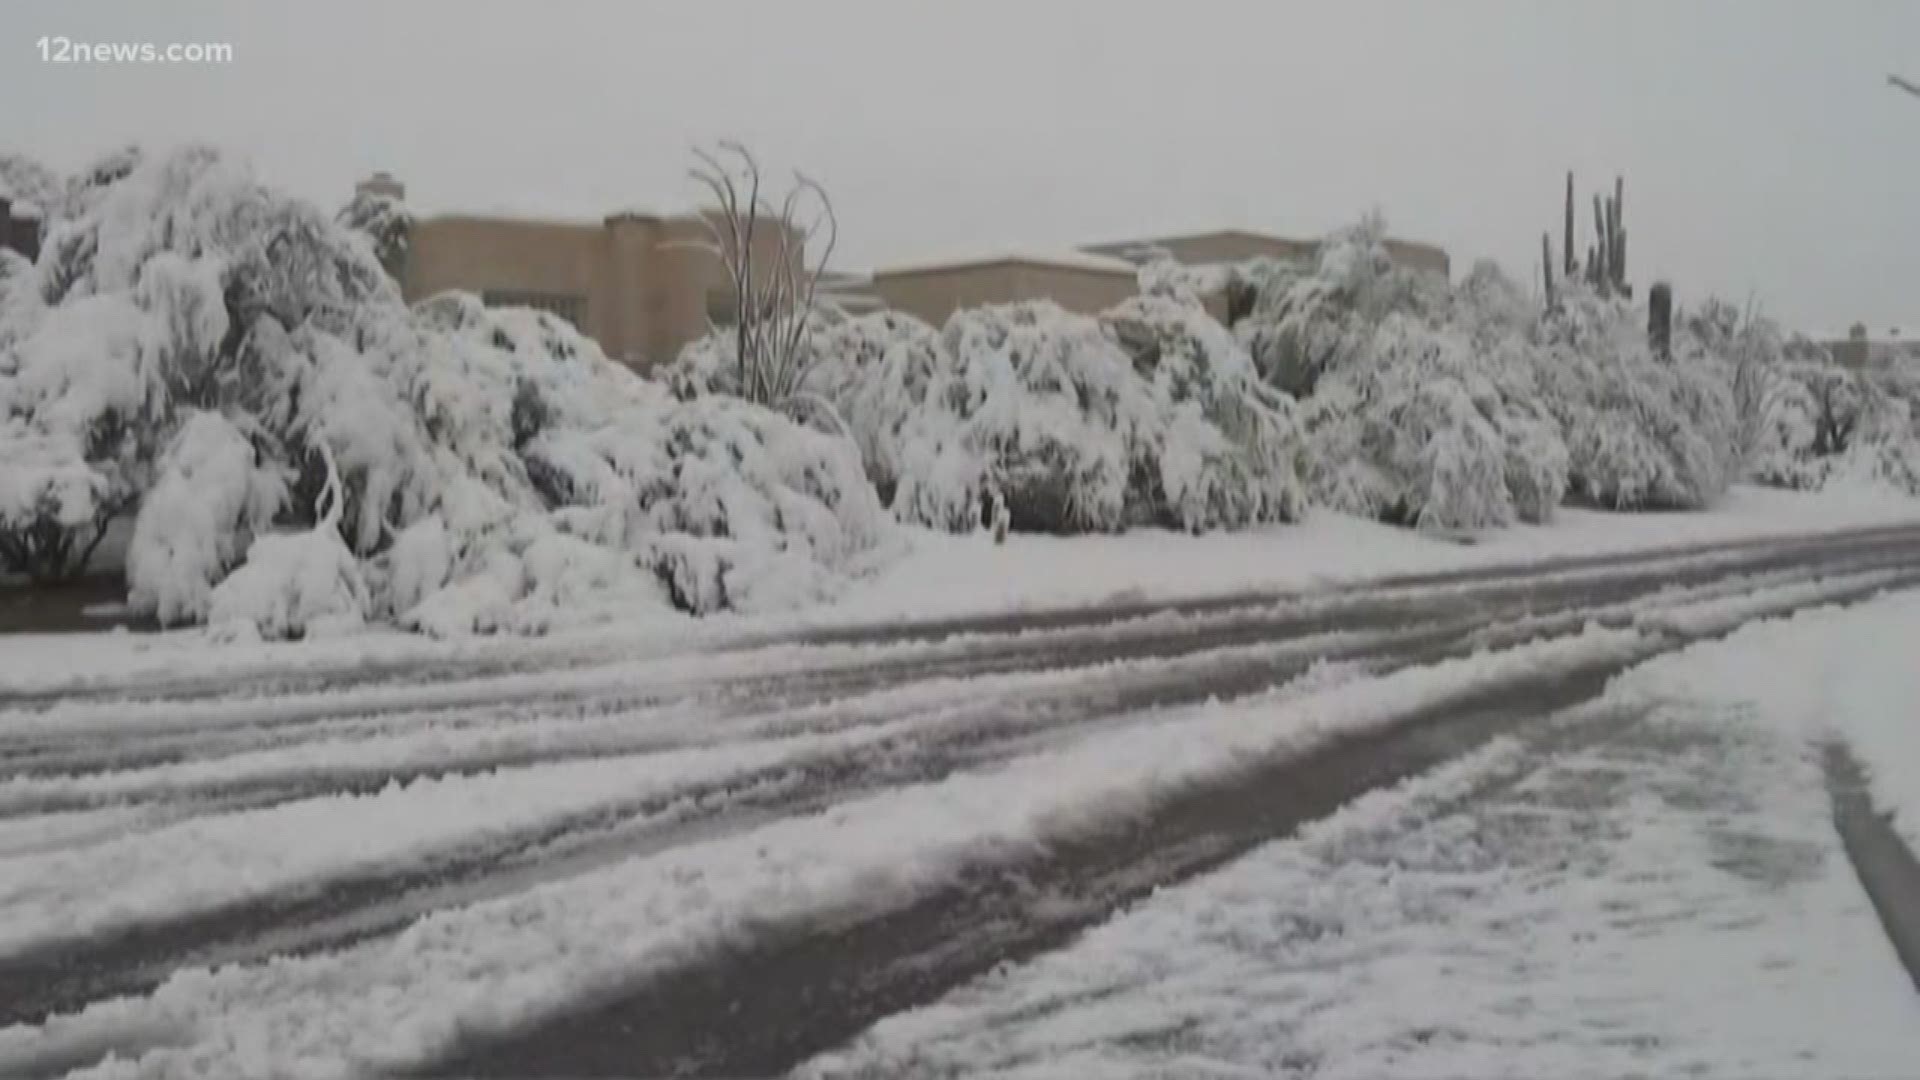 One year ago, on Feb. 21, 2019, record snowfall hit Arizona. 35.9 inches fell in Flagstaff and snow even made its way down to the Valley.